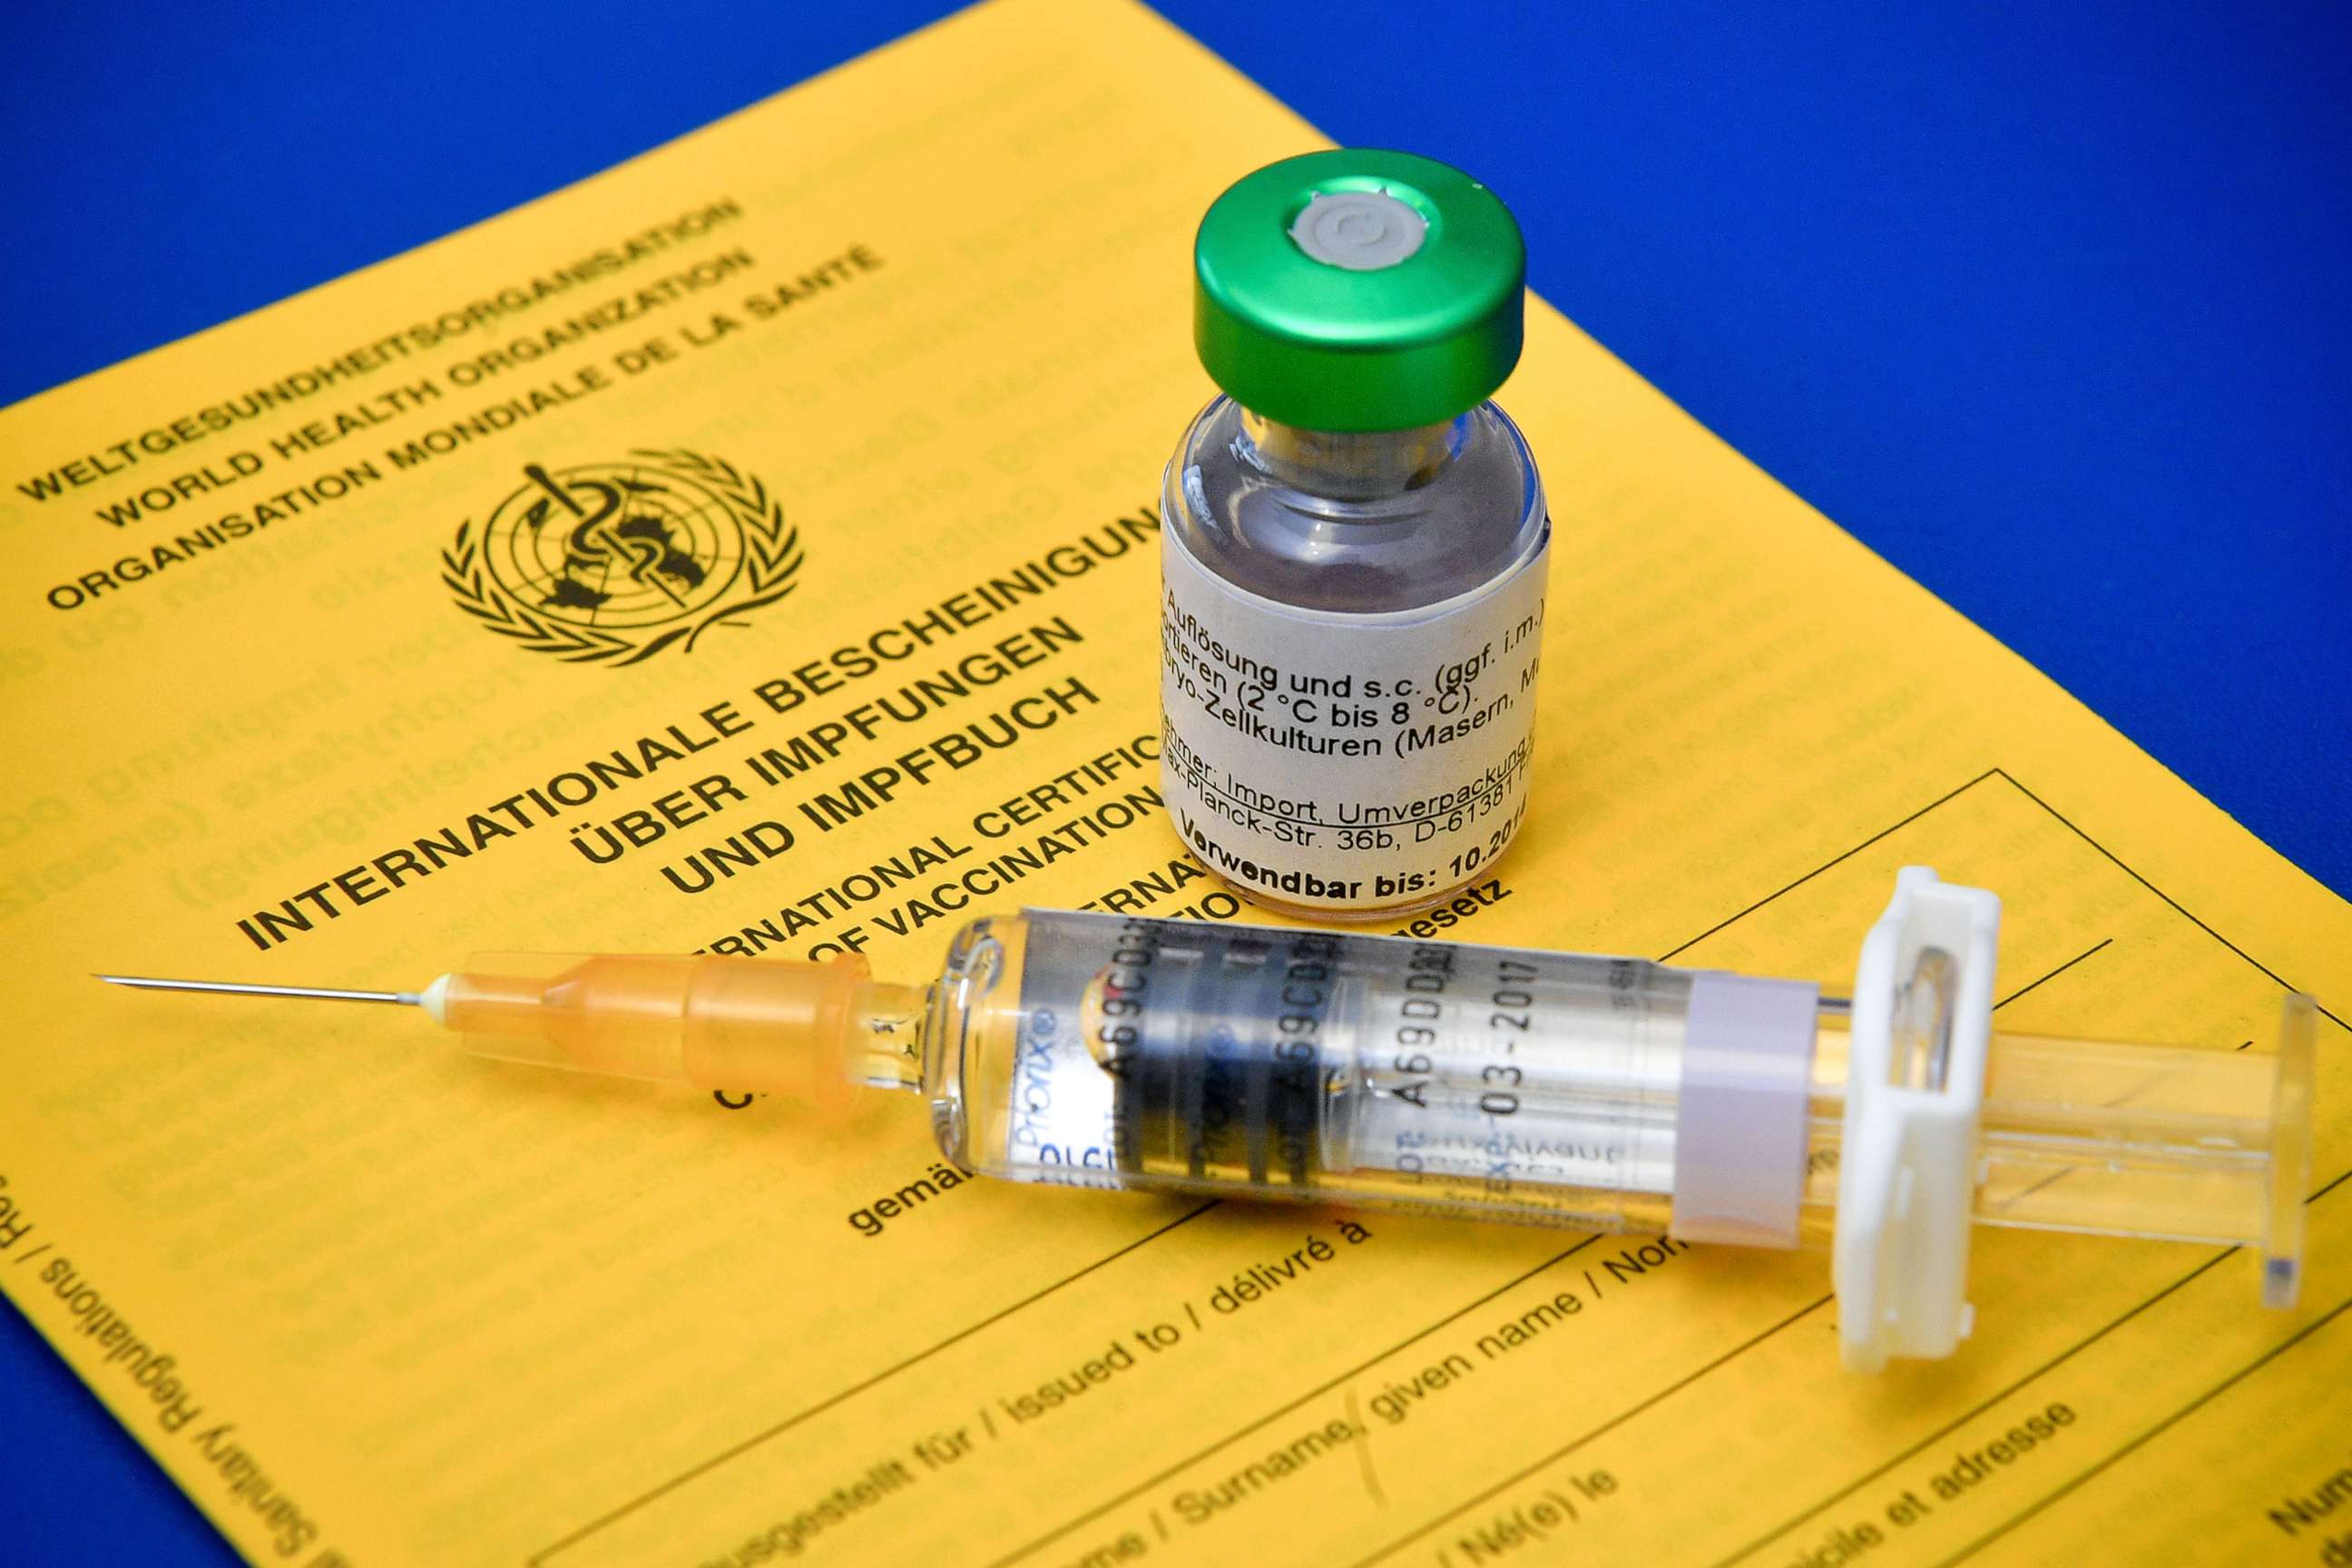 PHOTO: In this file photo, a measles vaccine is shown on a vaccination book on display in a hospital in Schwelm, Germany, on April 17, 2019.